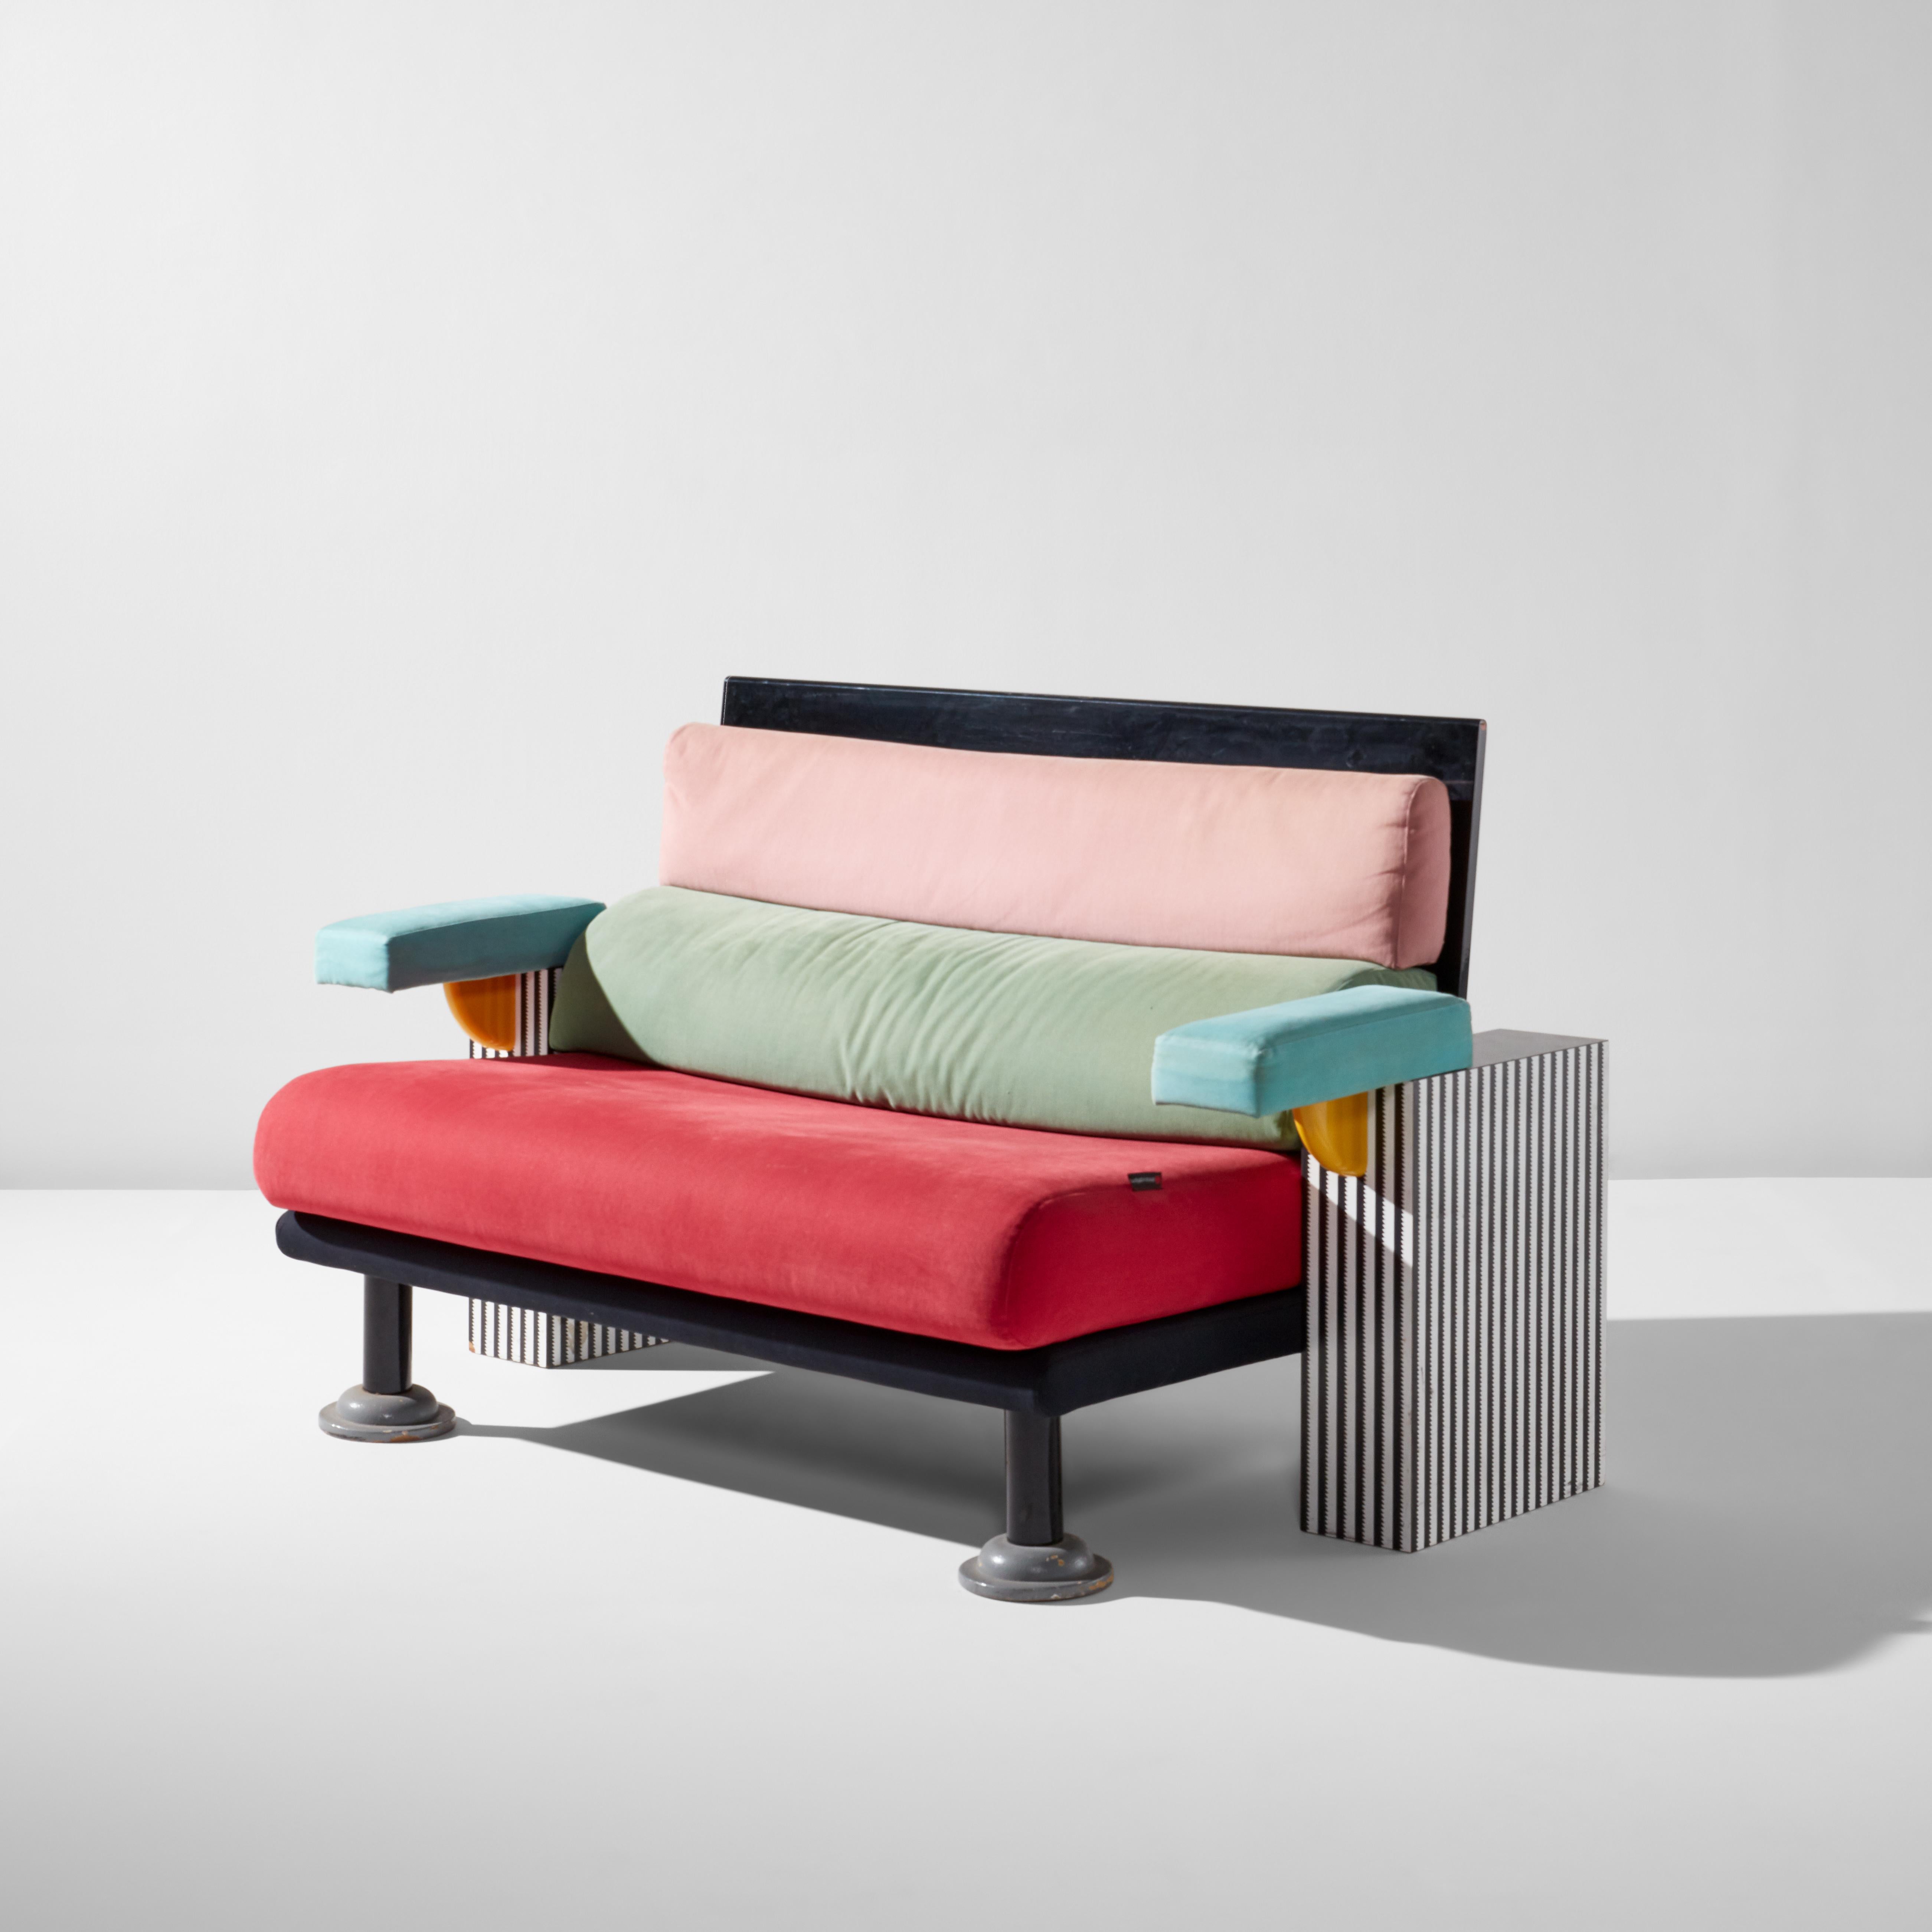 True to Memphis form, the 'Lido' lounge was not designed to be especially practical or inviting. In fact, its design was more intended for someone 'on-the-go' with its firm, woollen padded upholstery and short seat. This feeling is also evoked by